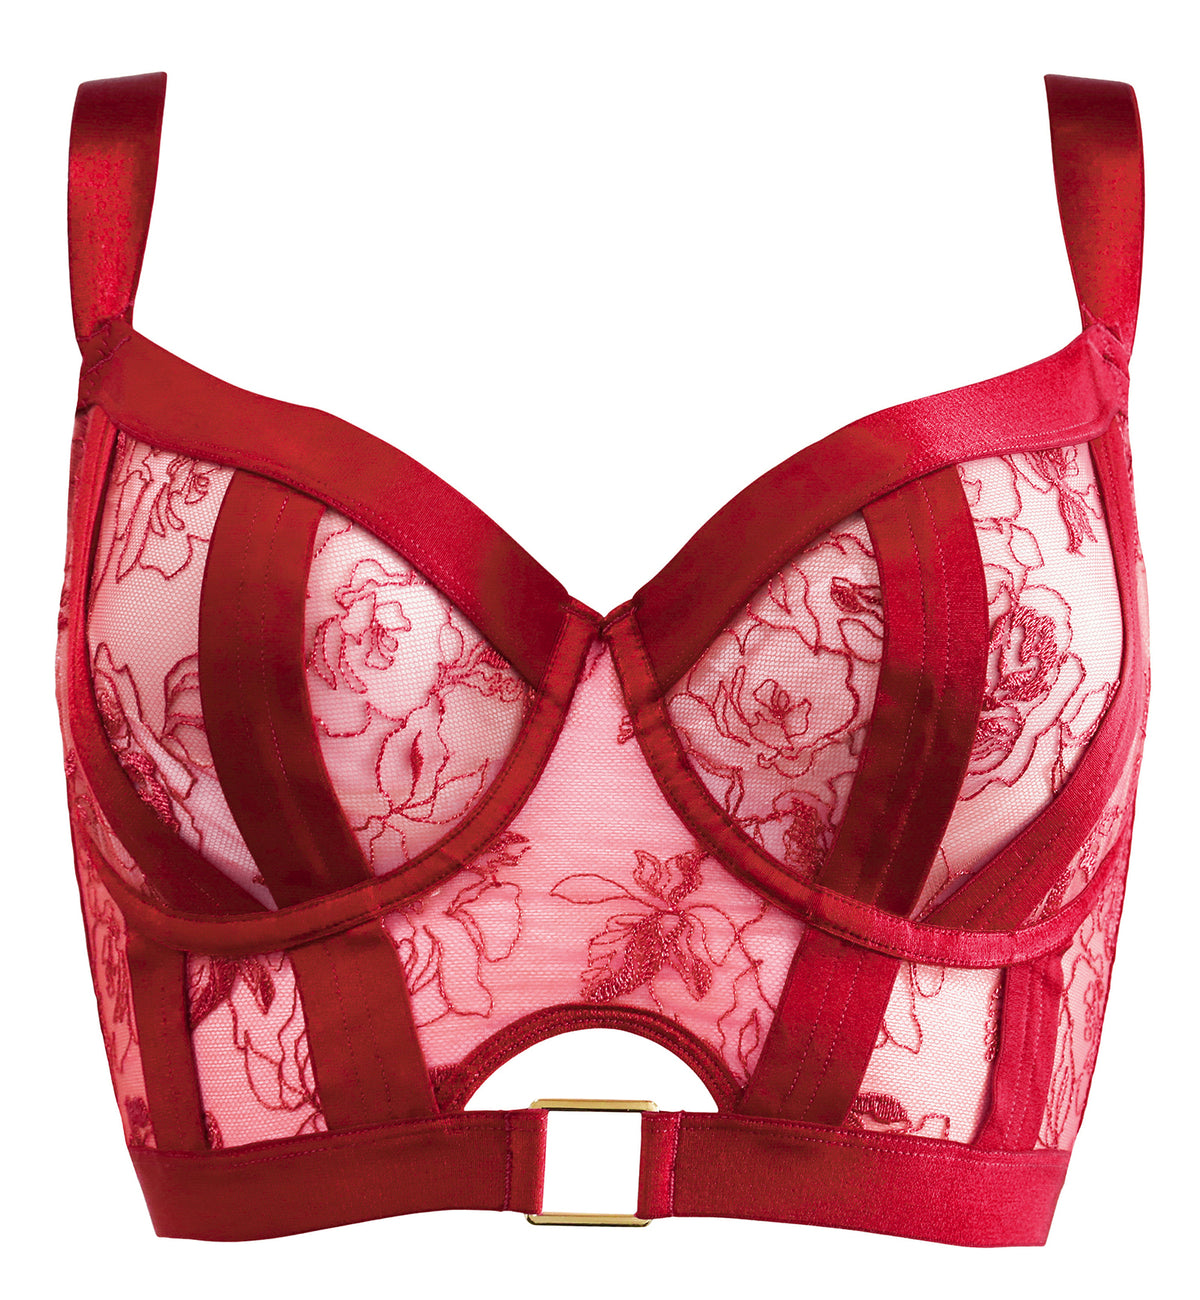 Pour Moi India Embroidery Underwire Bustier (20339),32D,Red - Red,32D